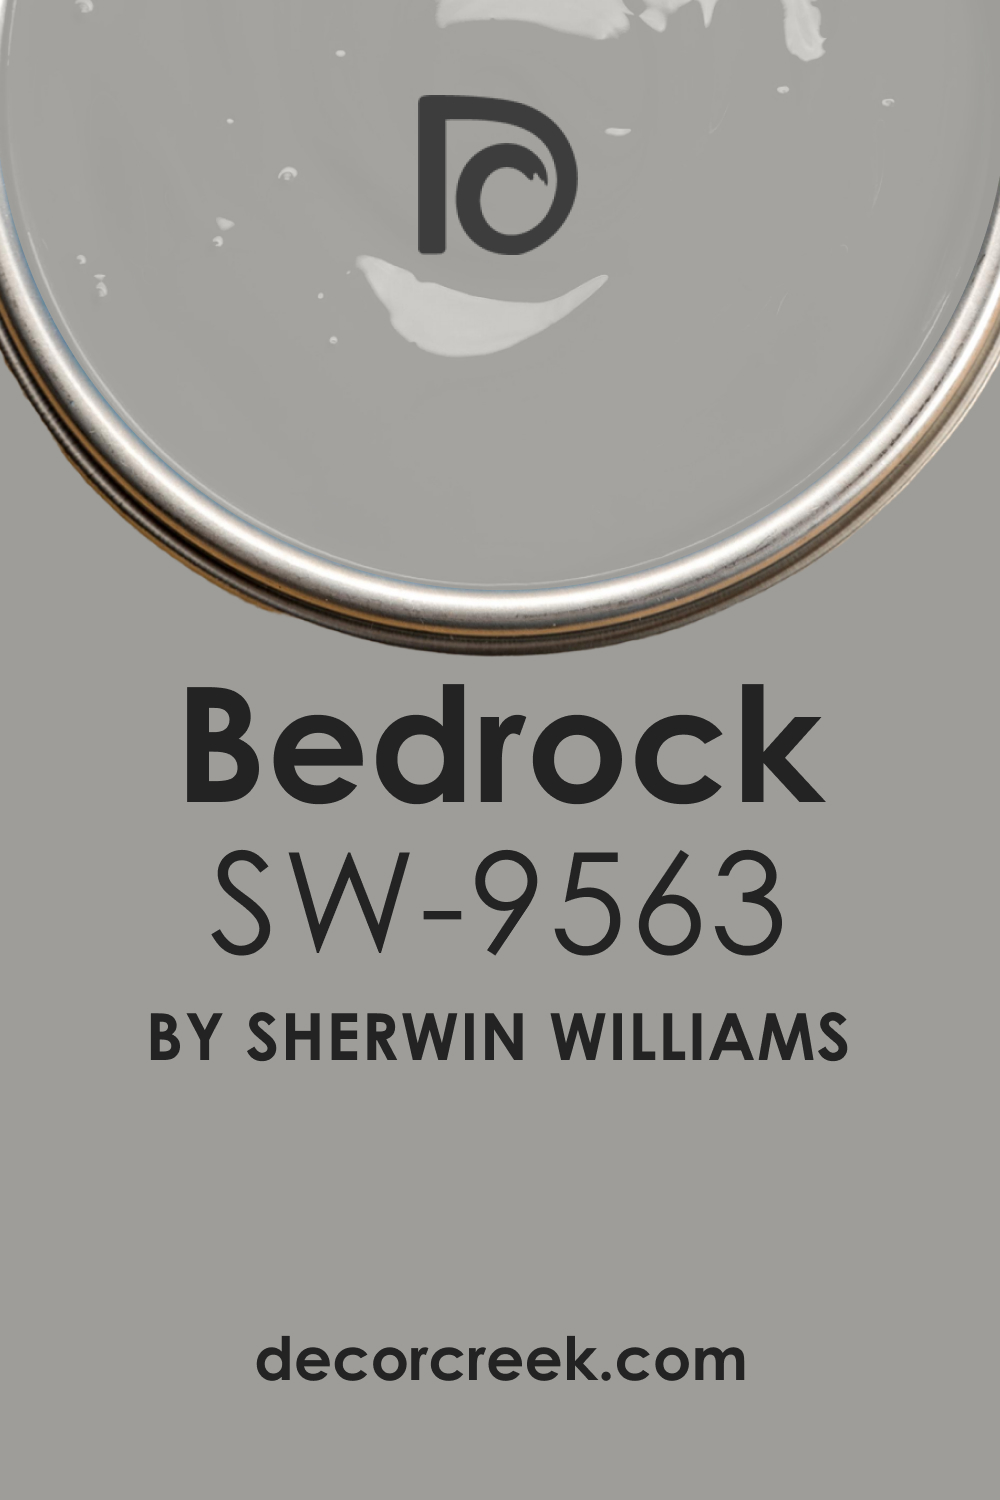 Bedrock SW 9563 Paint Color by Sherwin-Williams